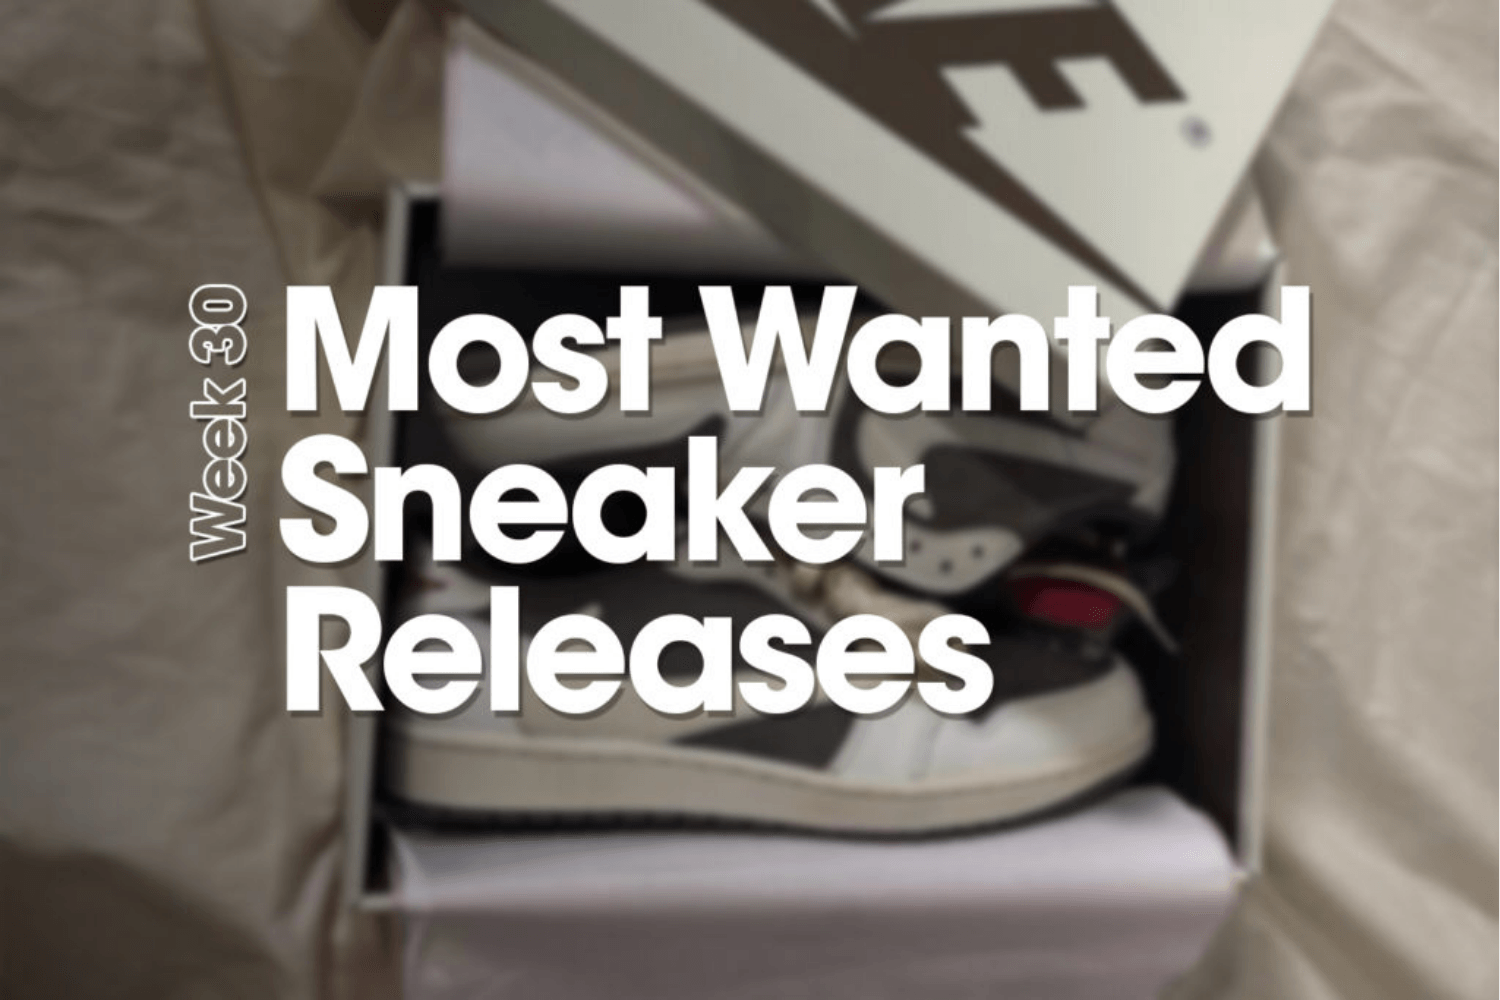 Most Wanted Sneaker Releases - Woche 30